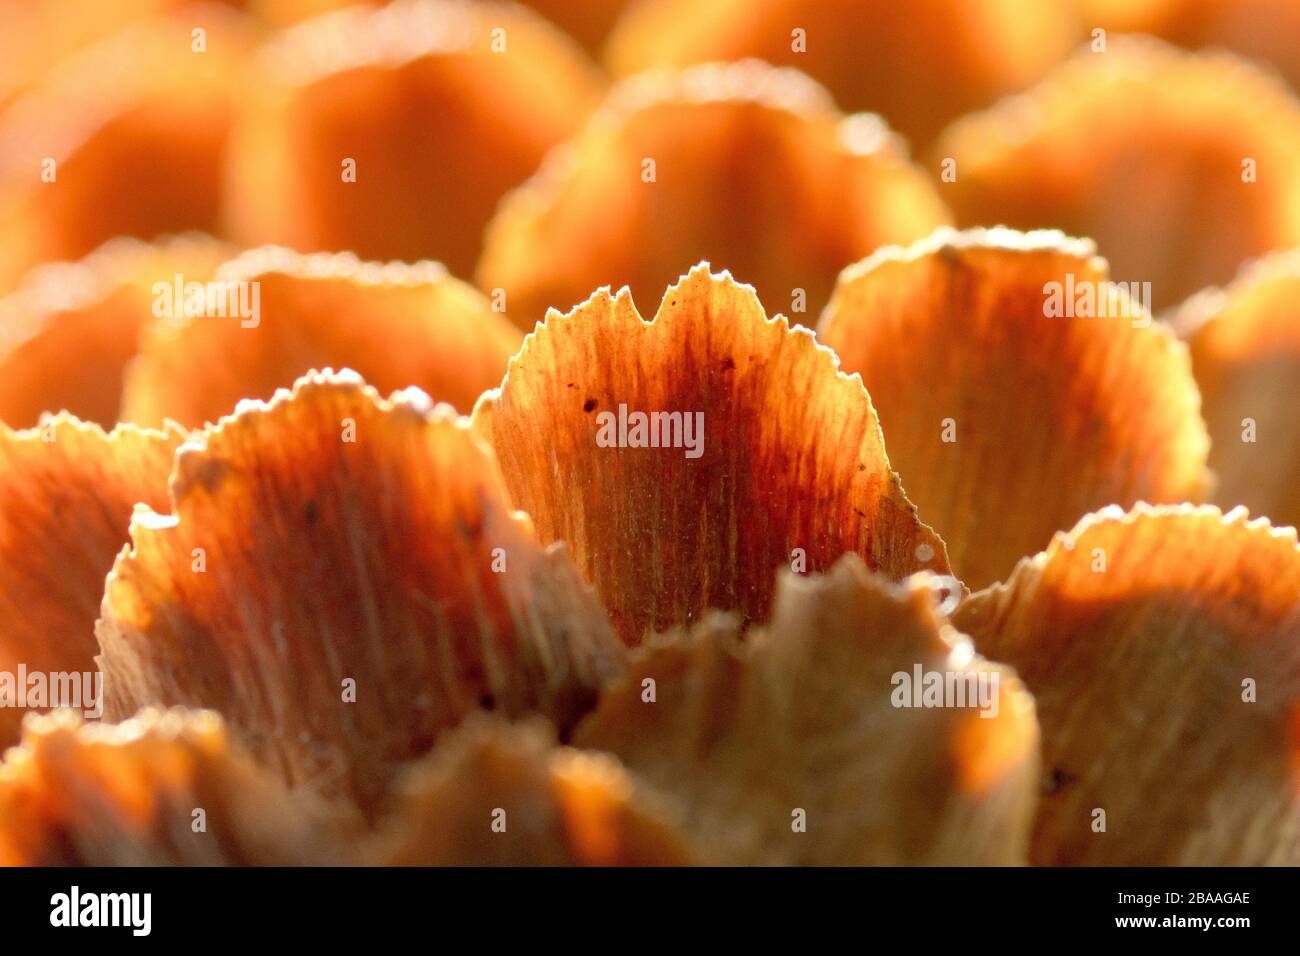 A close up abstract shot of a Sitka Spruce (picea sitchensis) pine cone backlit by the sun. Stock Photo